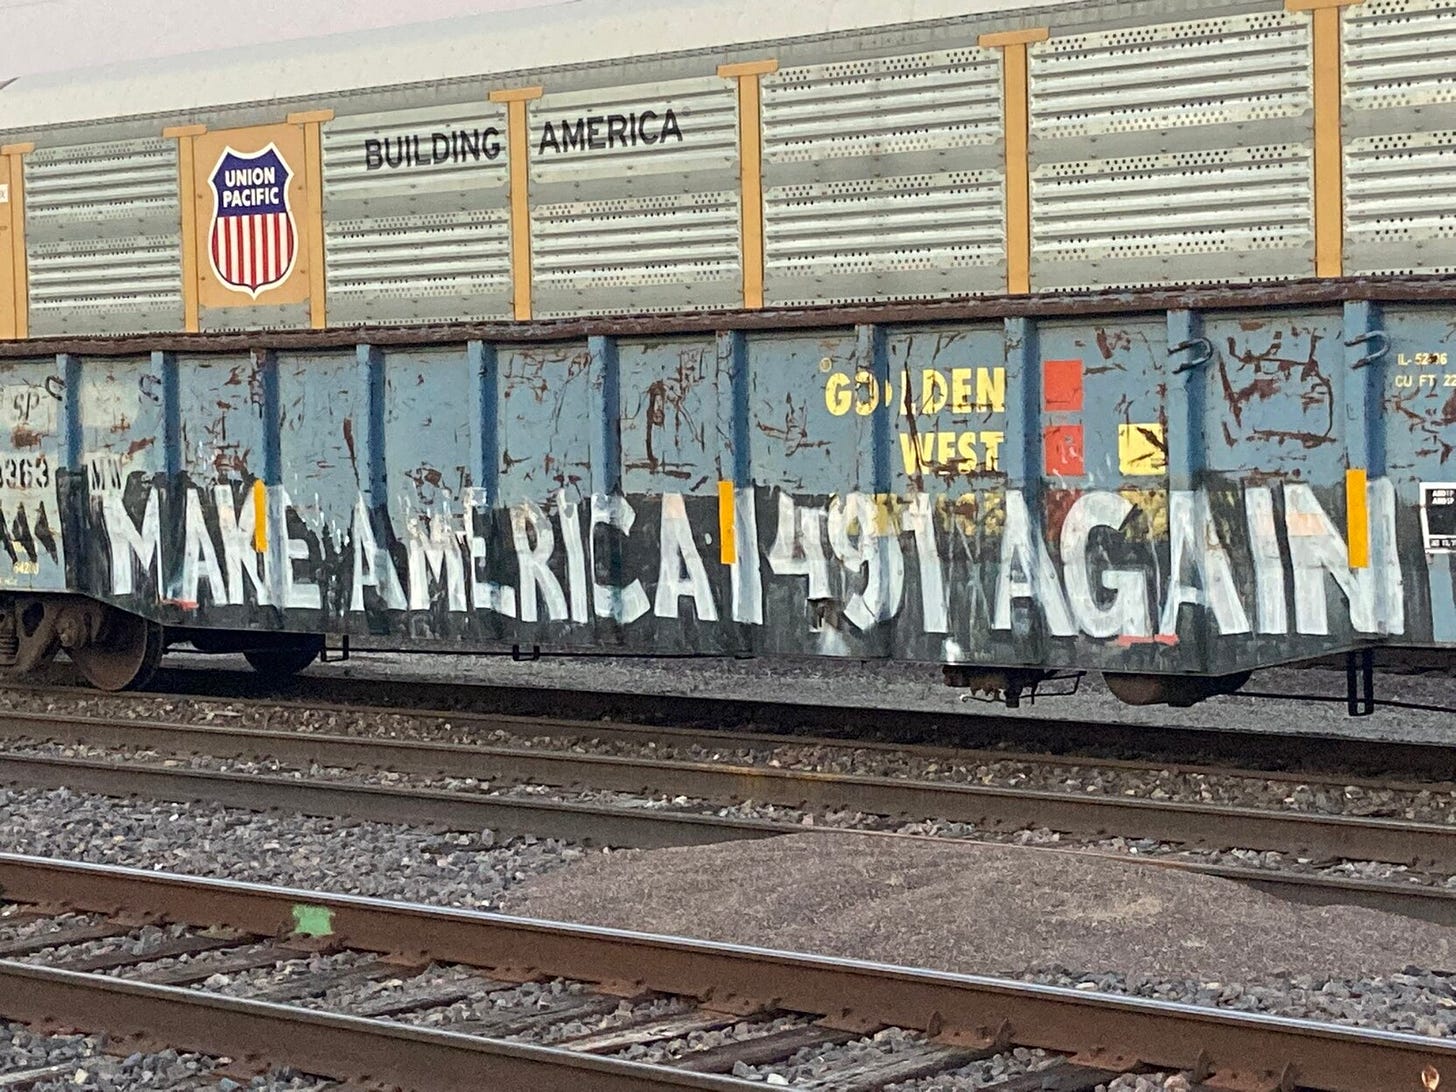 A heavily grafittied train: text painted on it reads: Make American 1491 again.